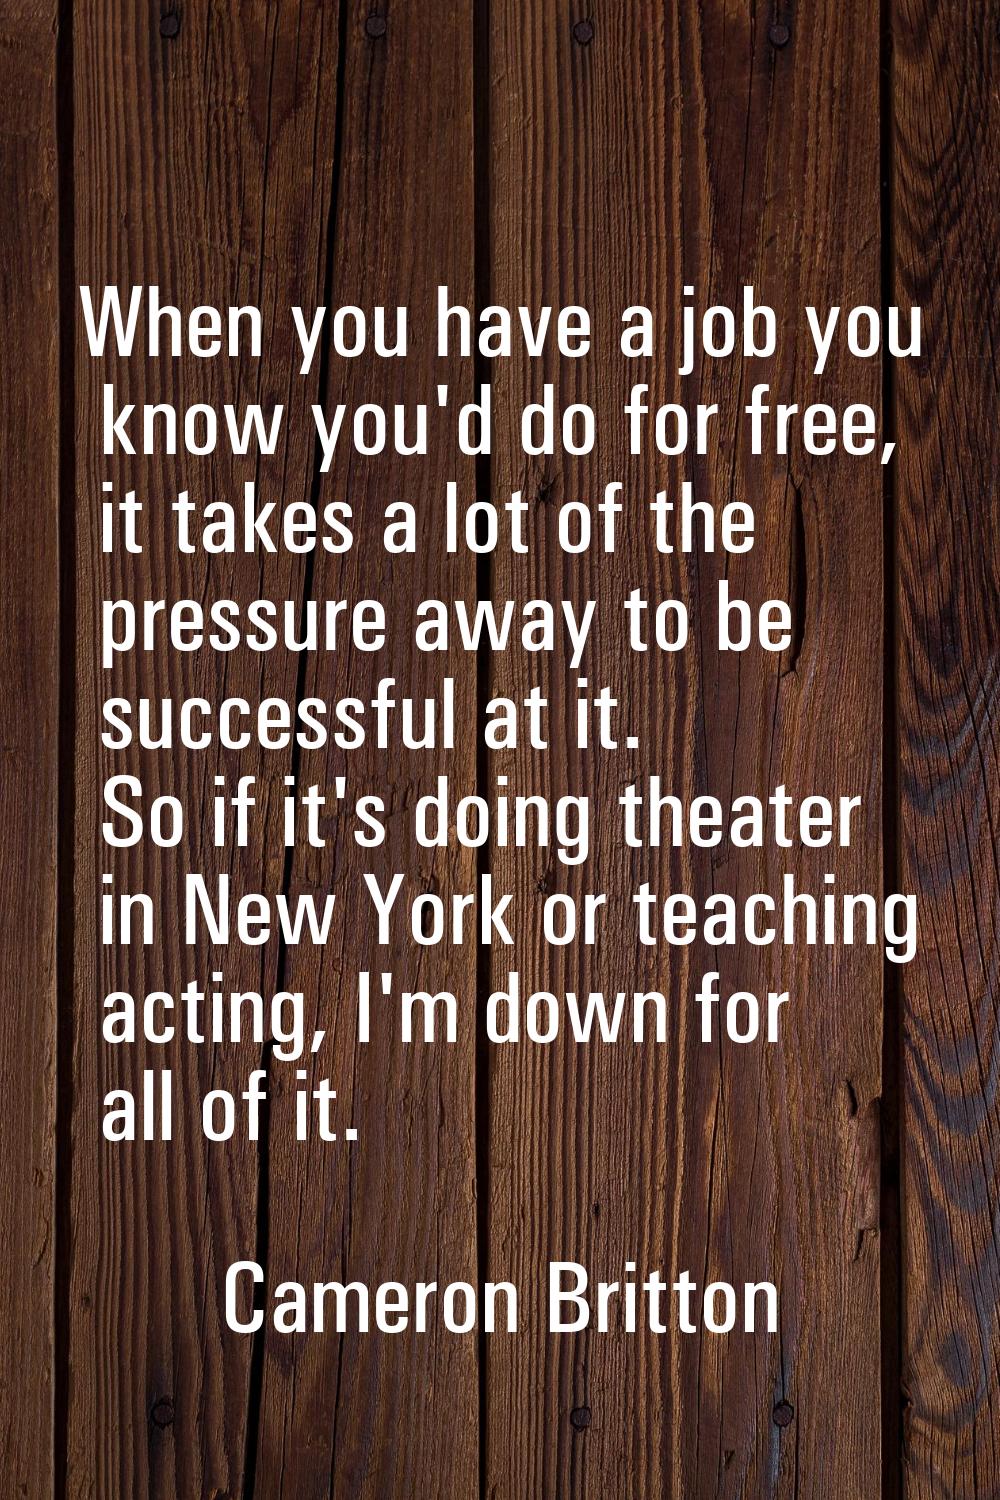 When you have a job you know you'd do for free, it takes a lot of the pressure away to be successfu